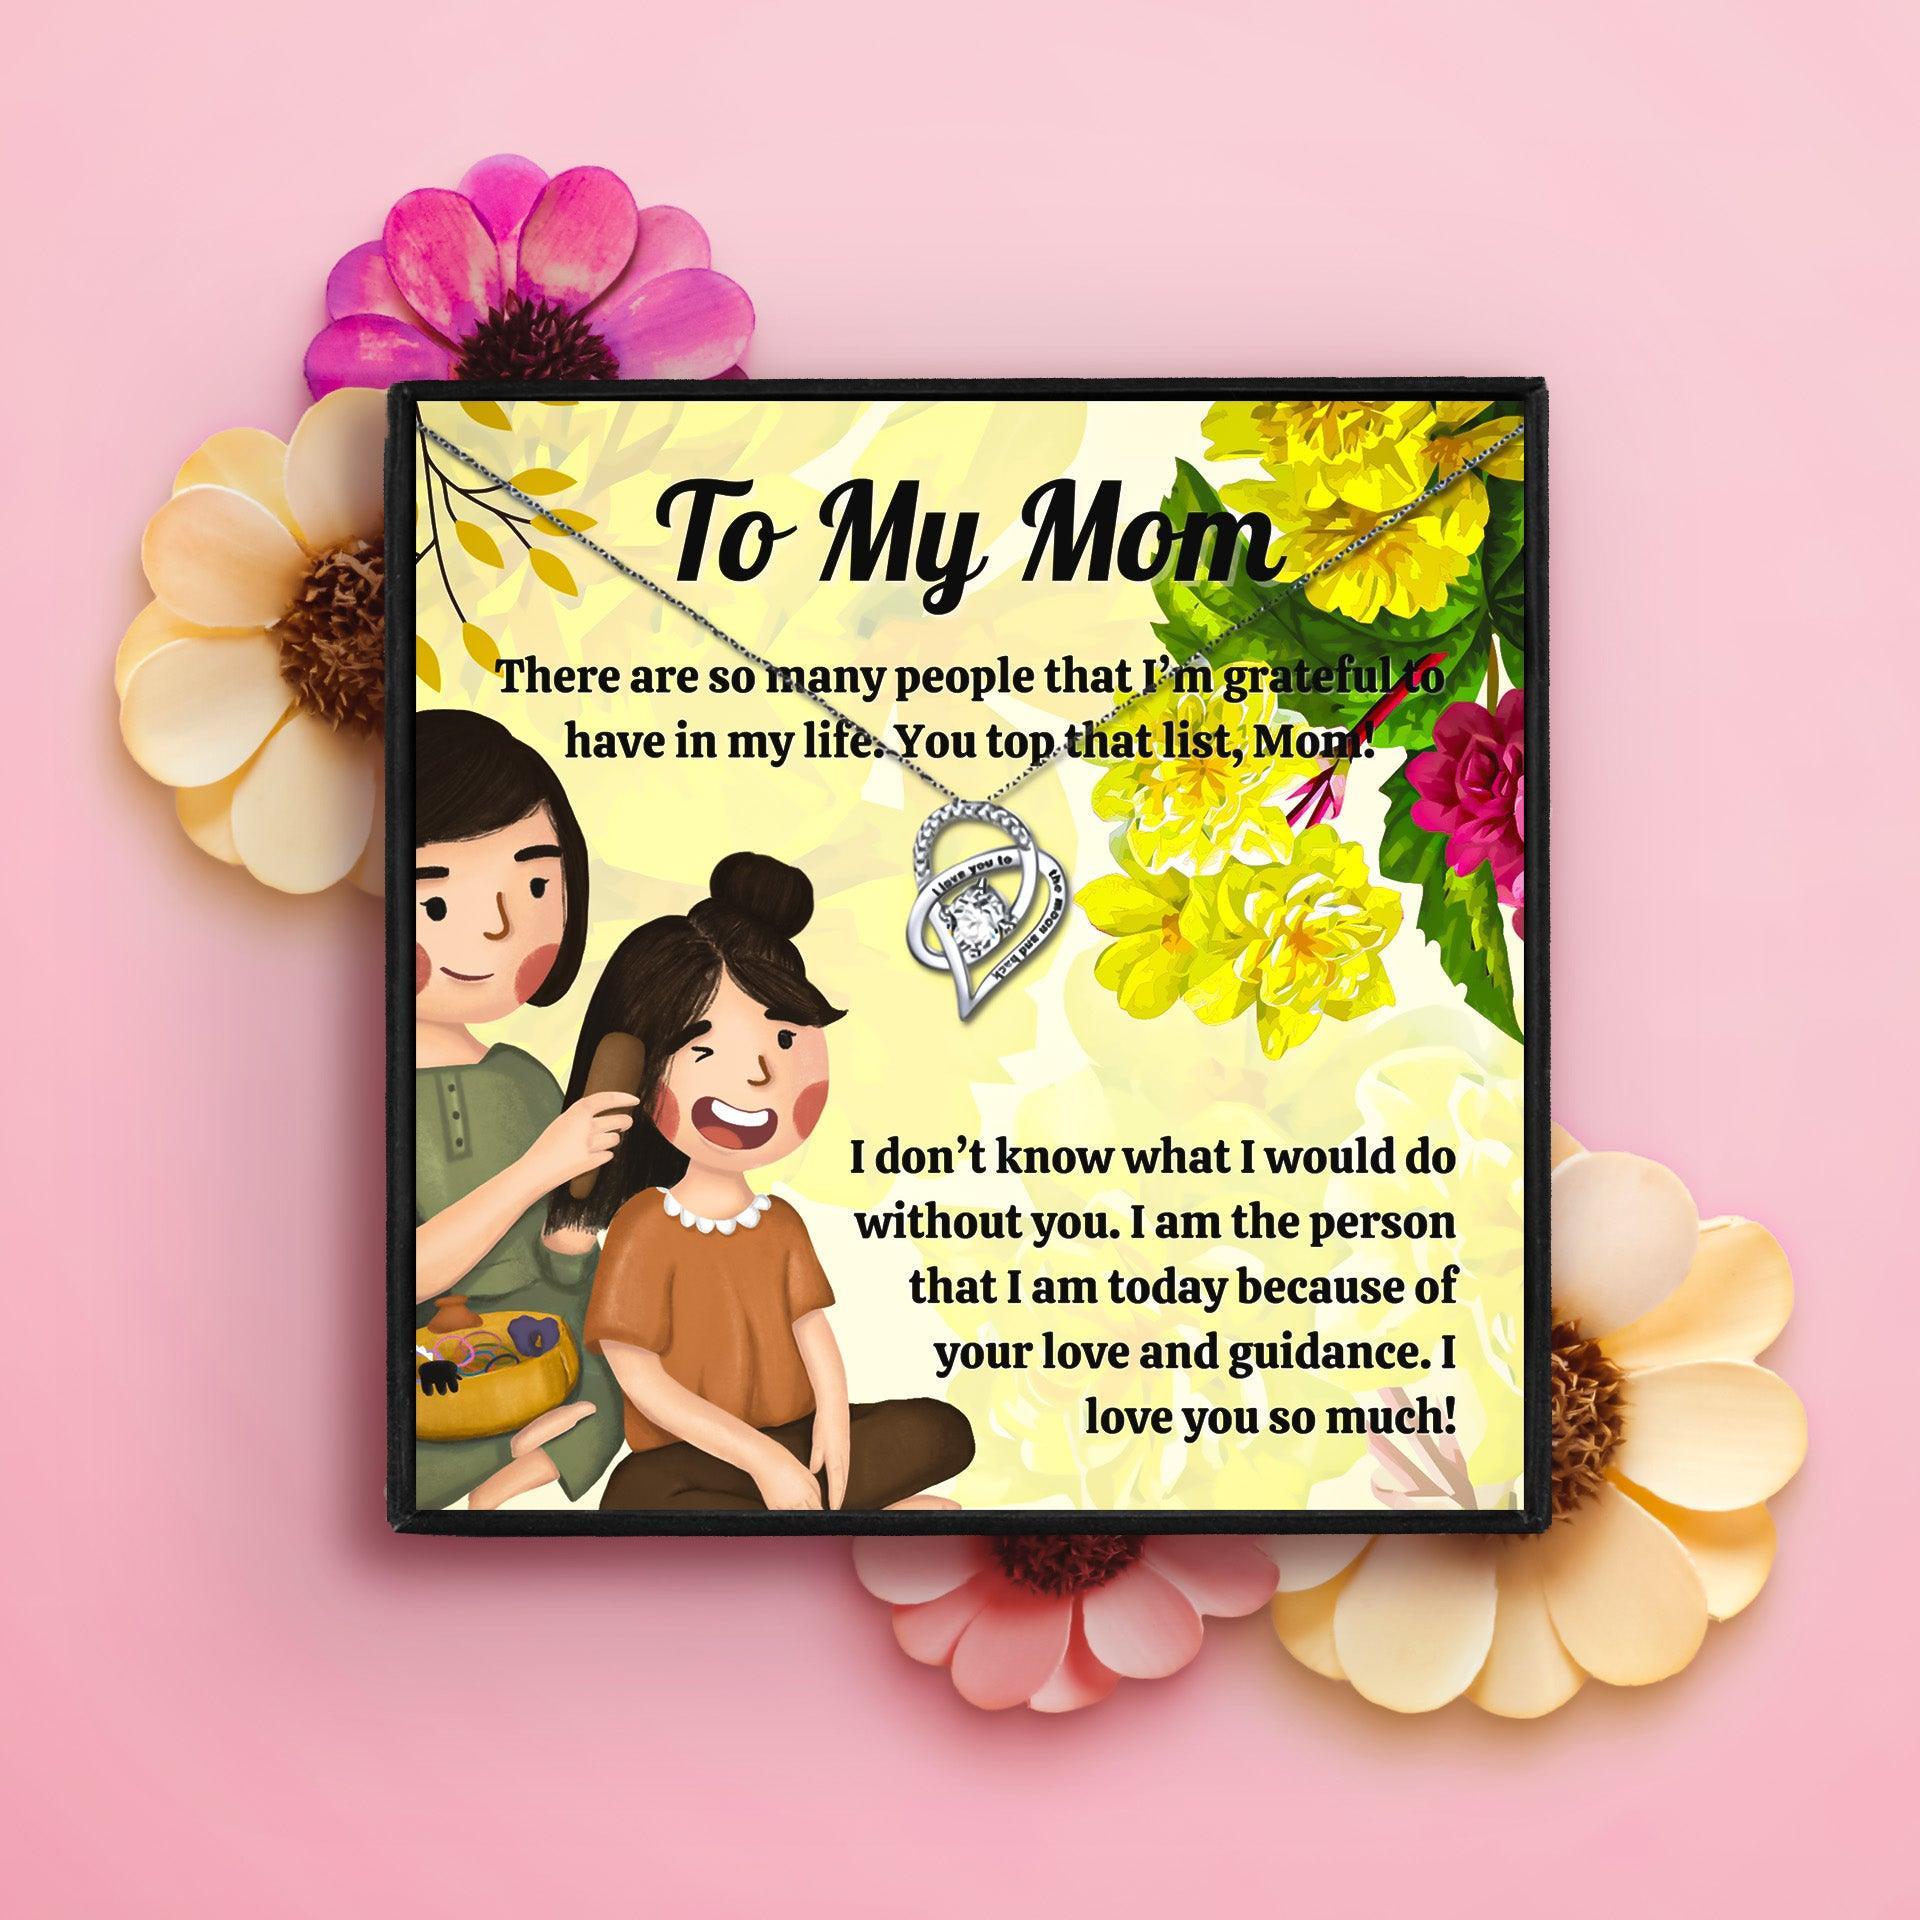 To My Loving Mom Necklace From Daughter in 2023 | To My Loving Mom Necklace From Daughter - undefined | gift, gift for mom, gift ideas, Gift Necklace, Gifts, Gifts for Bonus Mom, mom birthday gift, mom gift, mom gift ideas, Mom Necklace, Mom Necklace Gift, necklace, Necklaces, other necklace | From Hunny Life | hunnylife.com